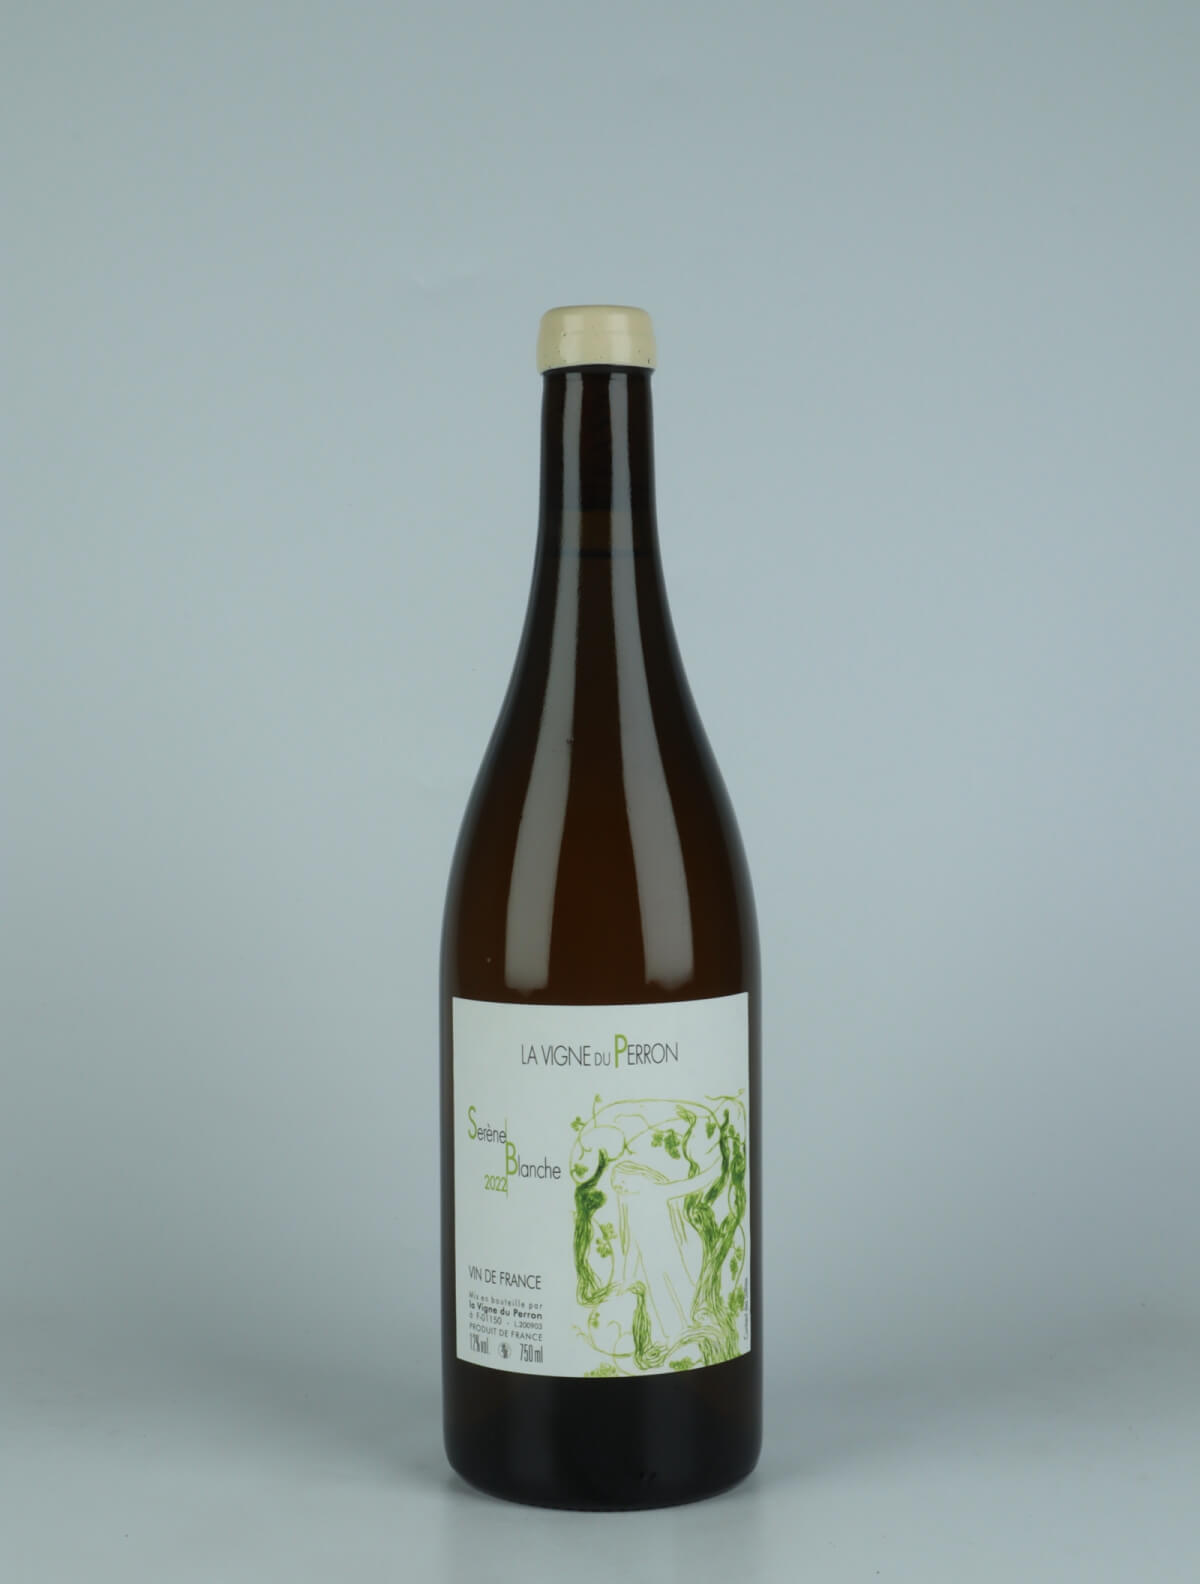 A bottle 2022 Serène Blanche White wine from Domaine du Perron, Bugey in France